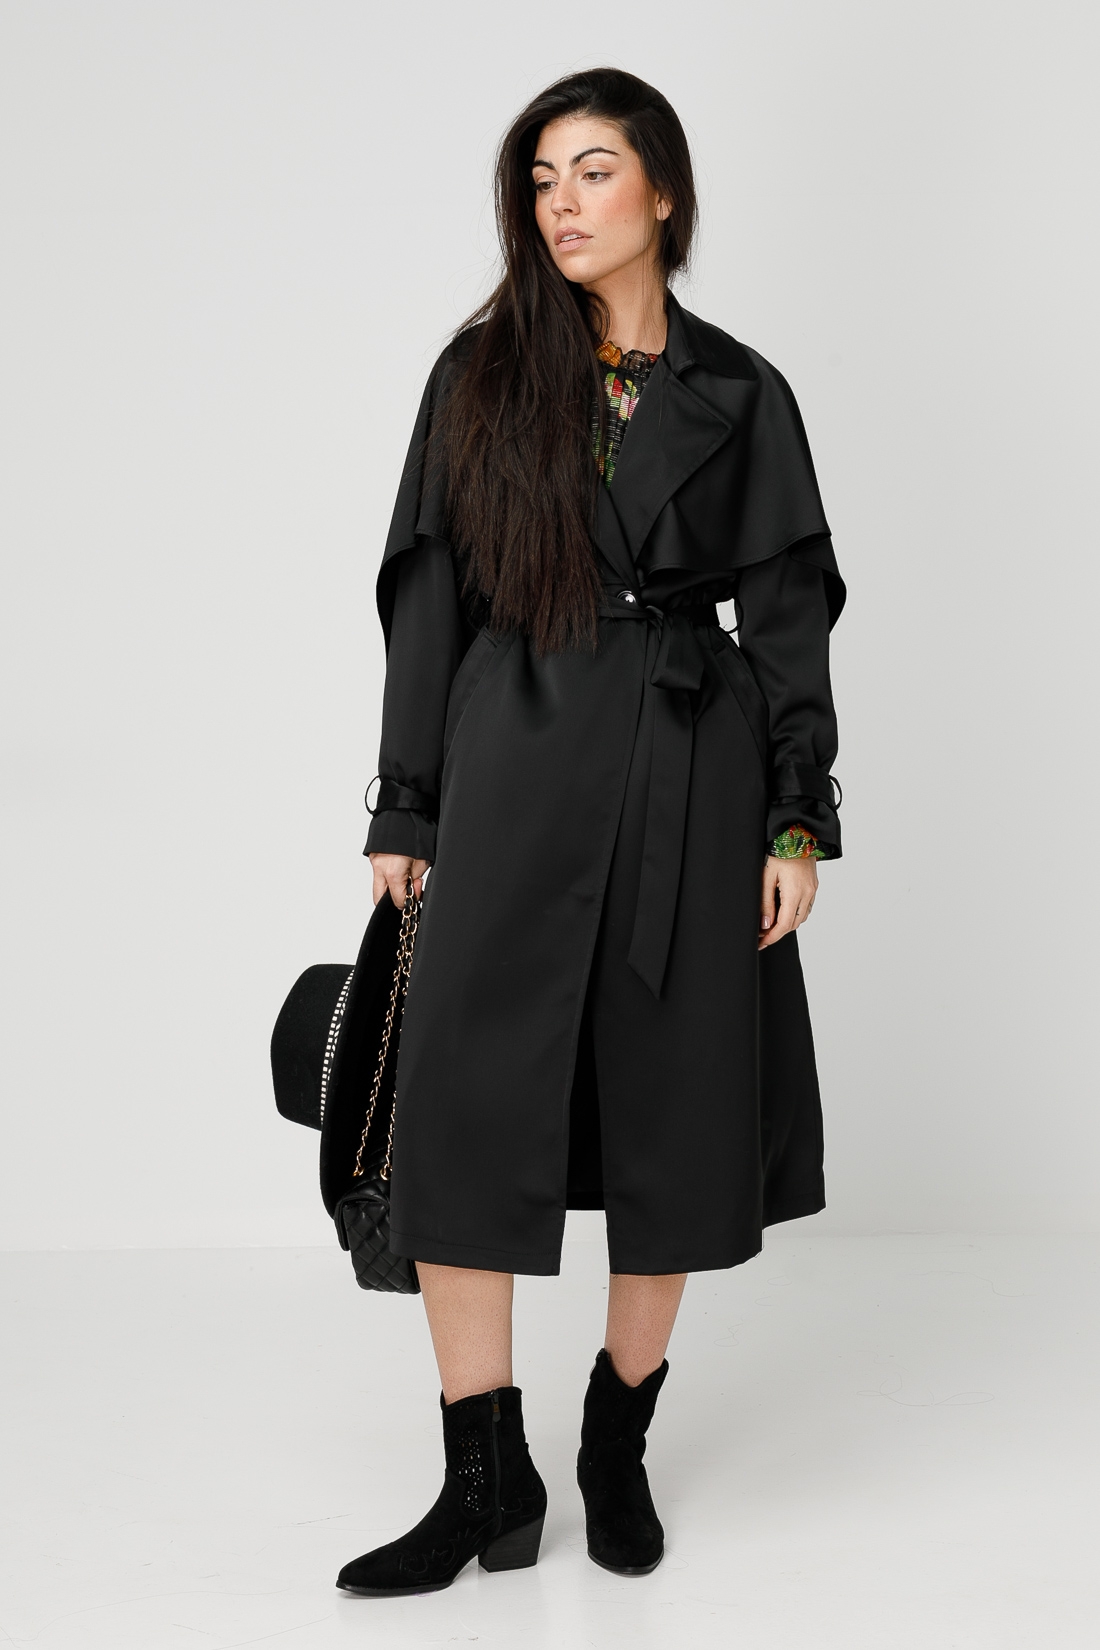 BOLTRES TRENCH - BLACK